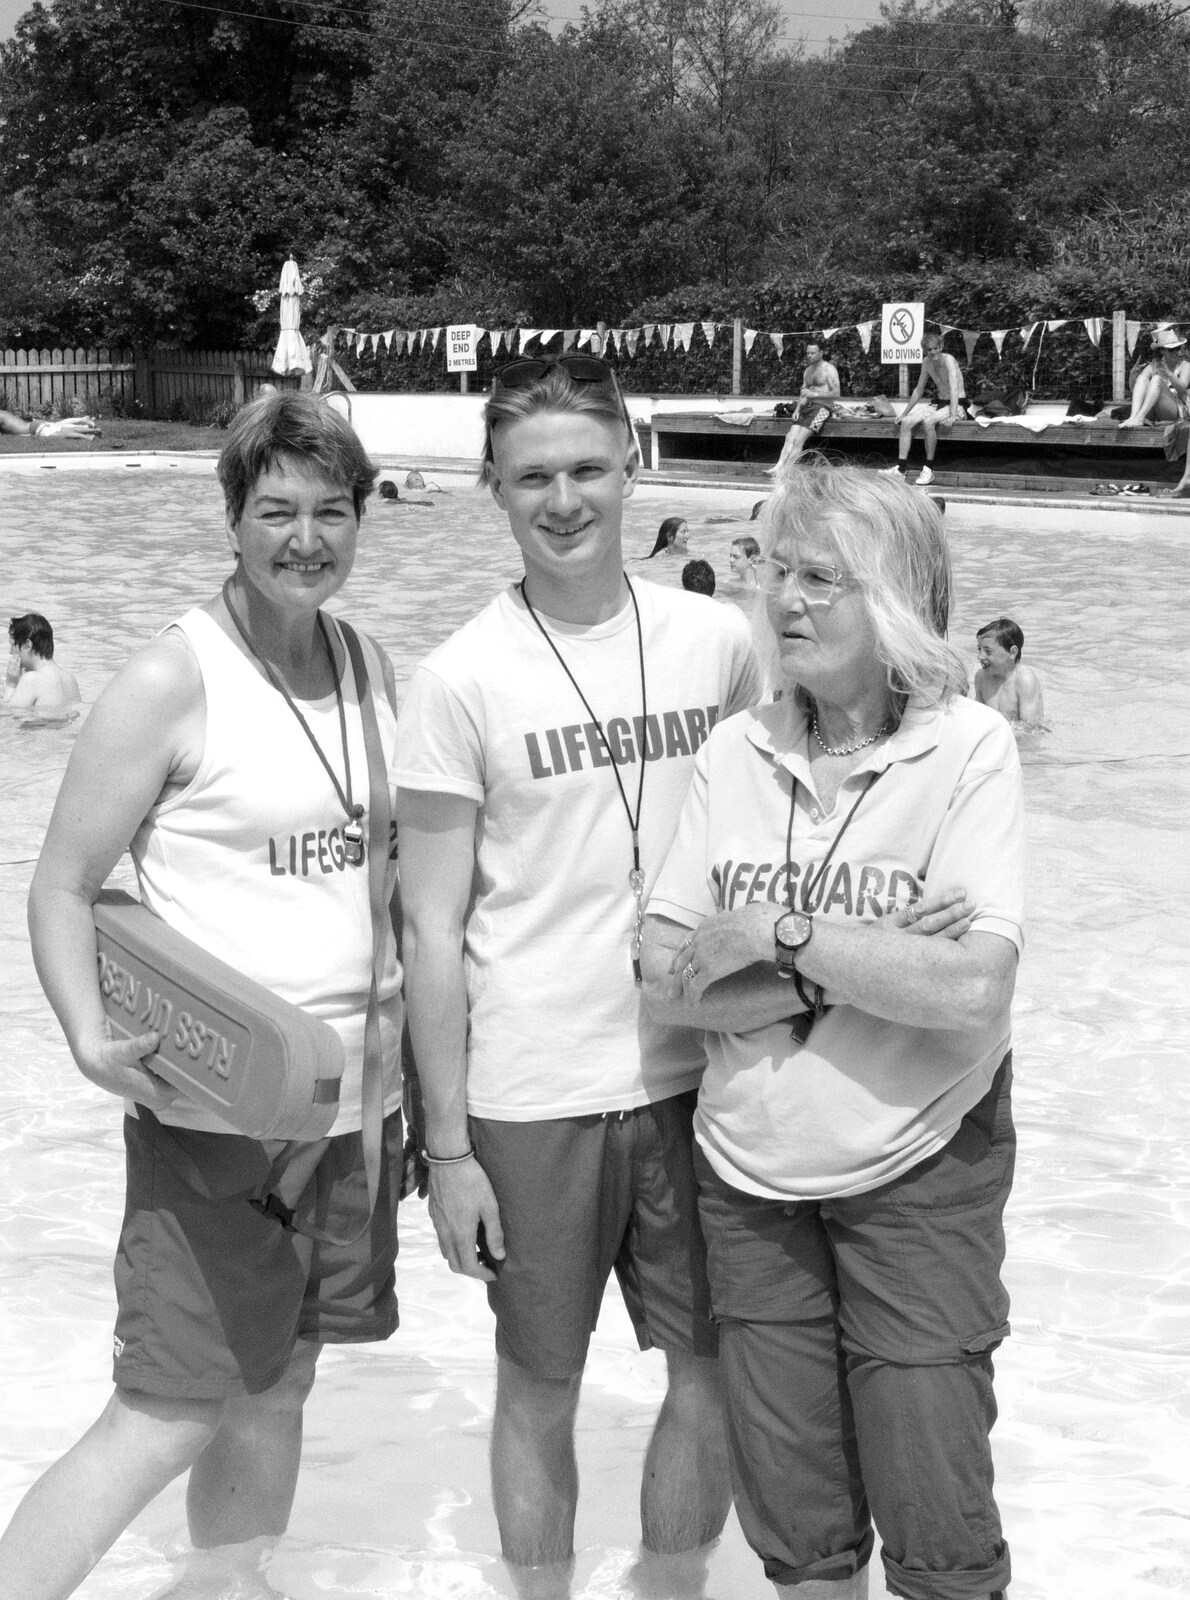 The Chagford lifeguards from The Grand Re-opening of the Chagford Lido, Chagford, Devon - 28th May 2016